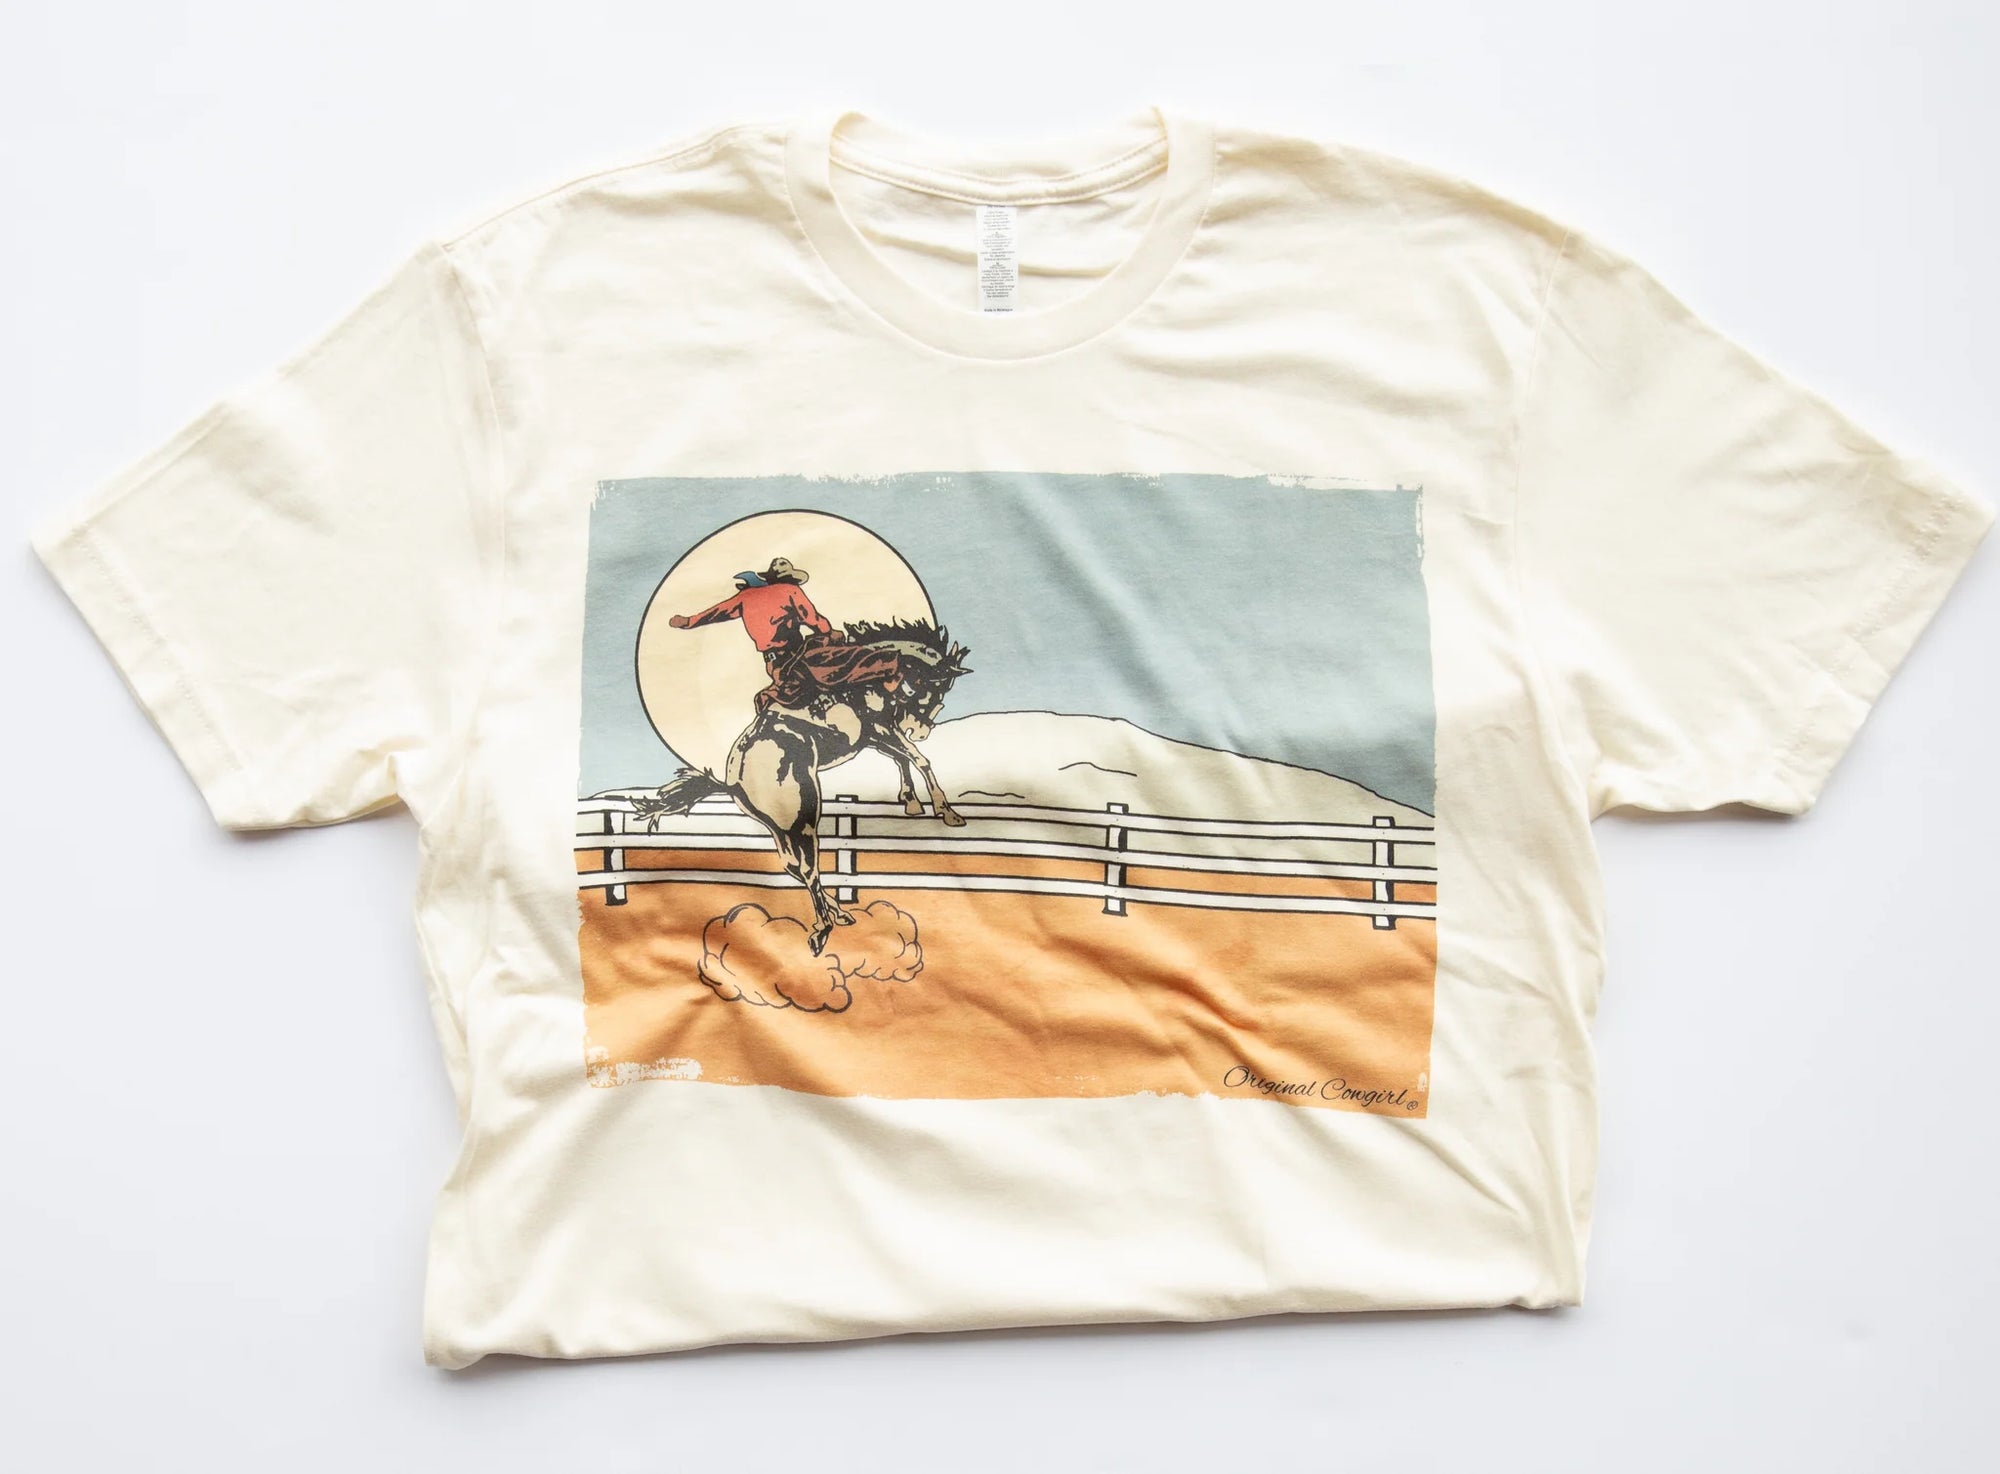 Moonlight Cowboy Graphic Tee (made 2 order) RBR